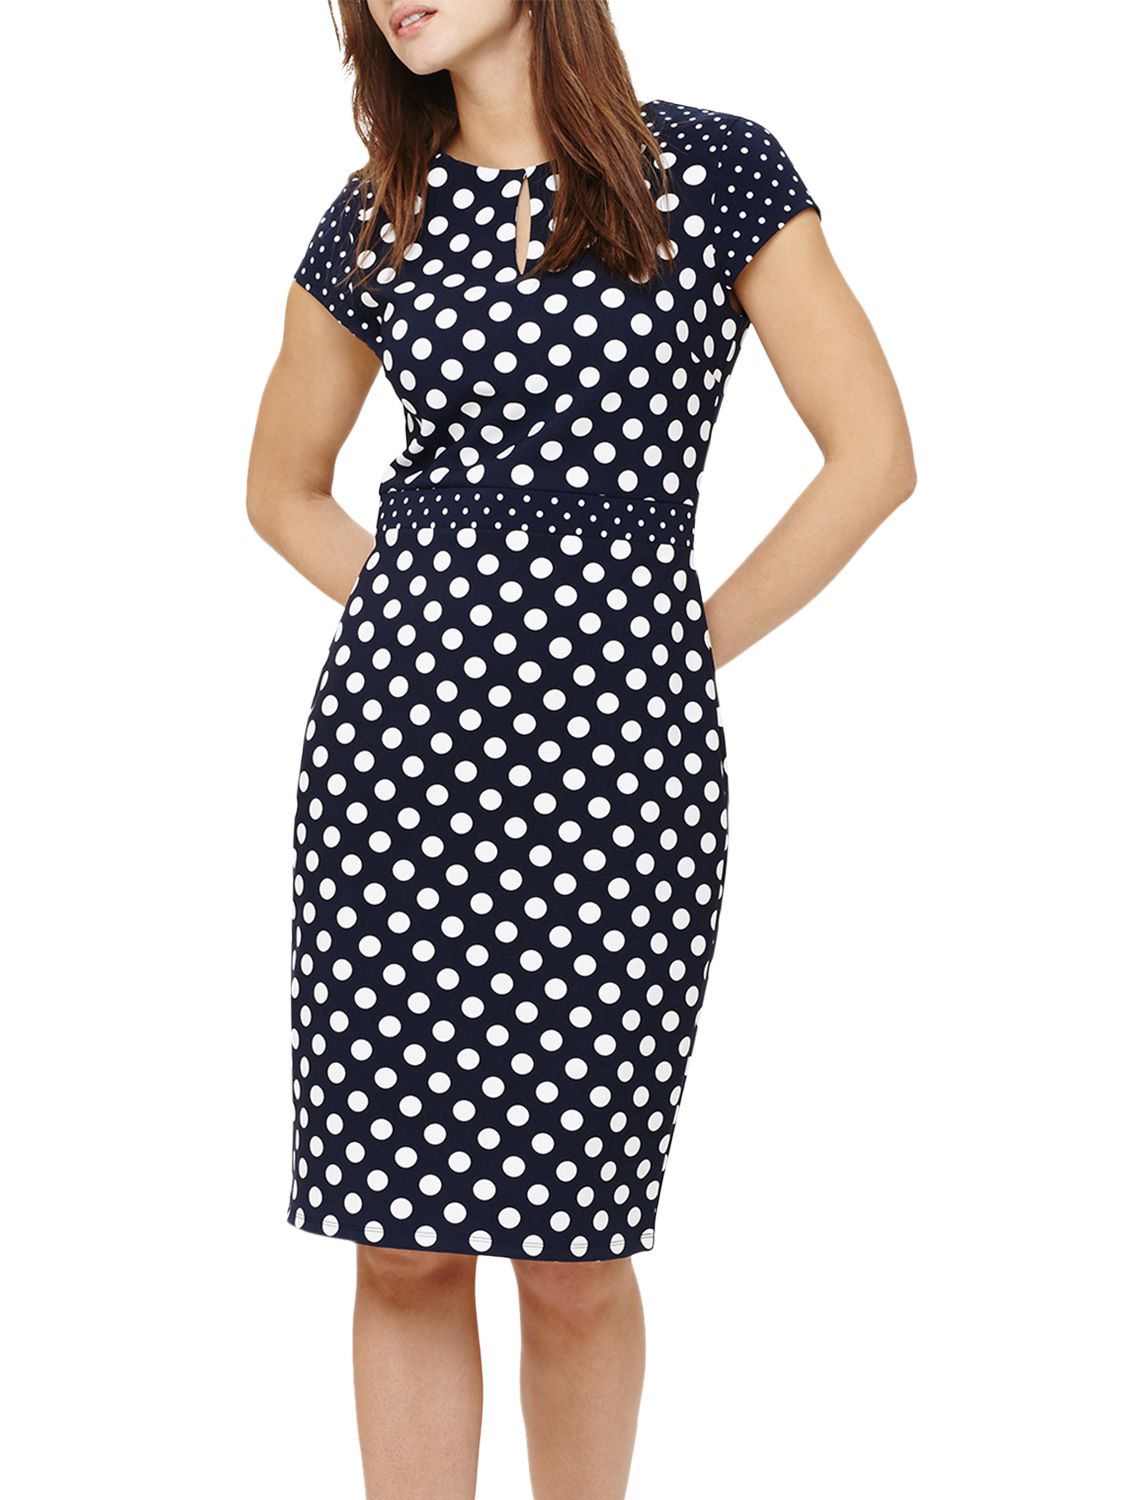 phase eight navy and white dress